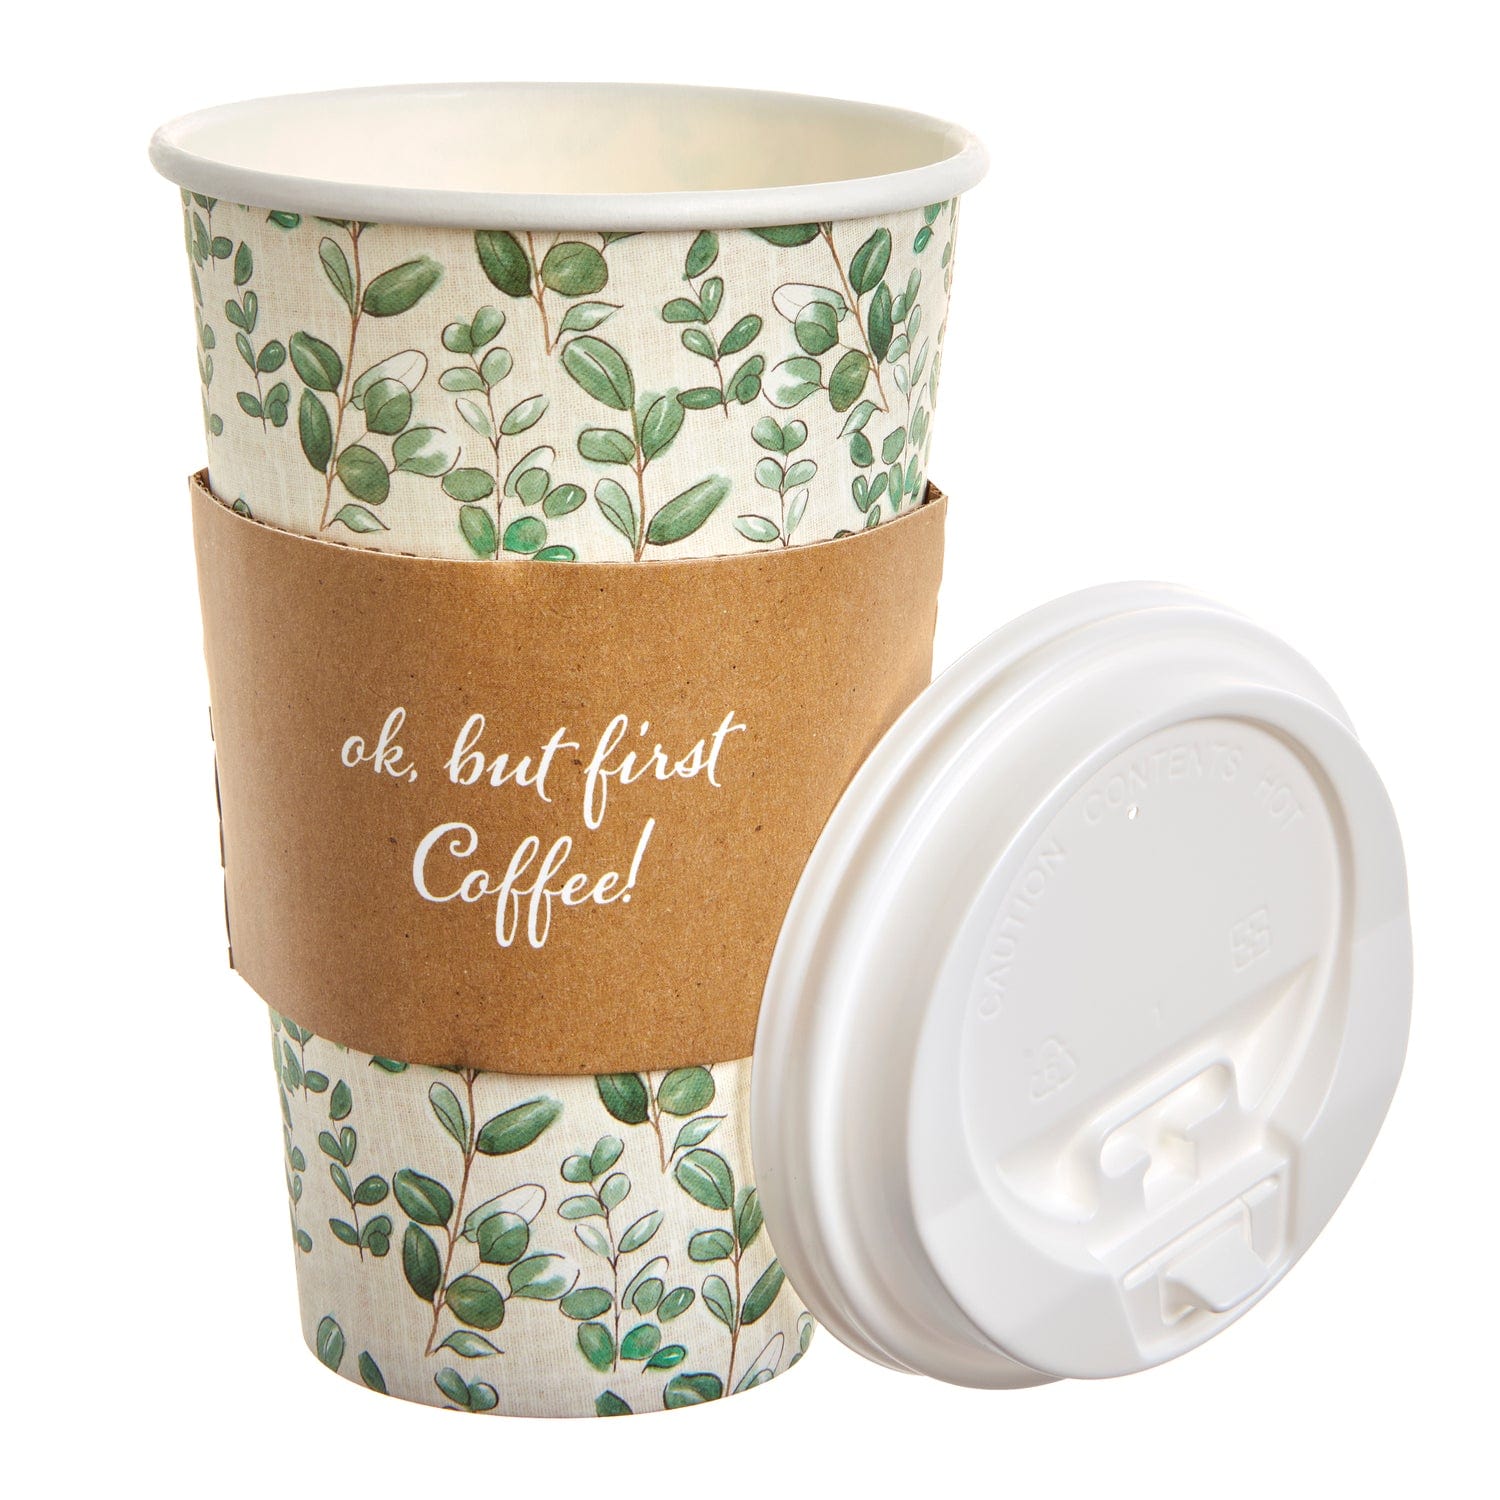 Foliage 'Ok but first Coffee!' Party Cups - 12 Count Roobee Drinkware 96721